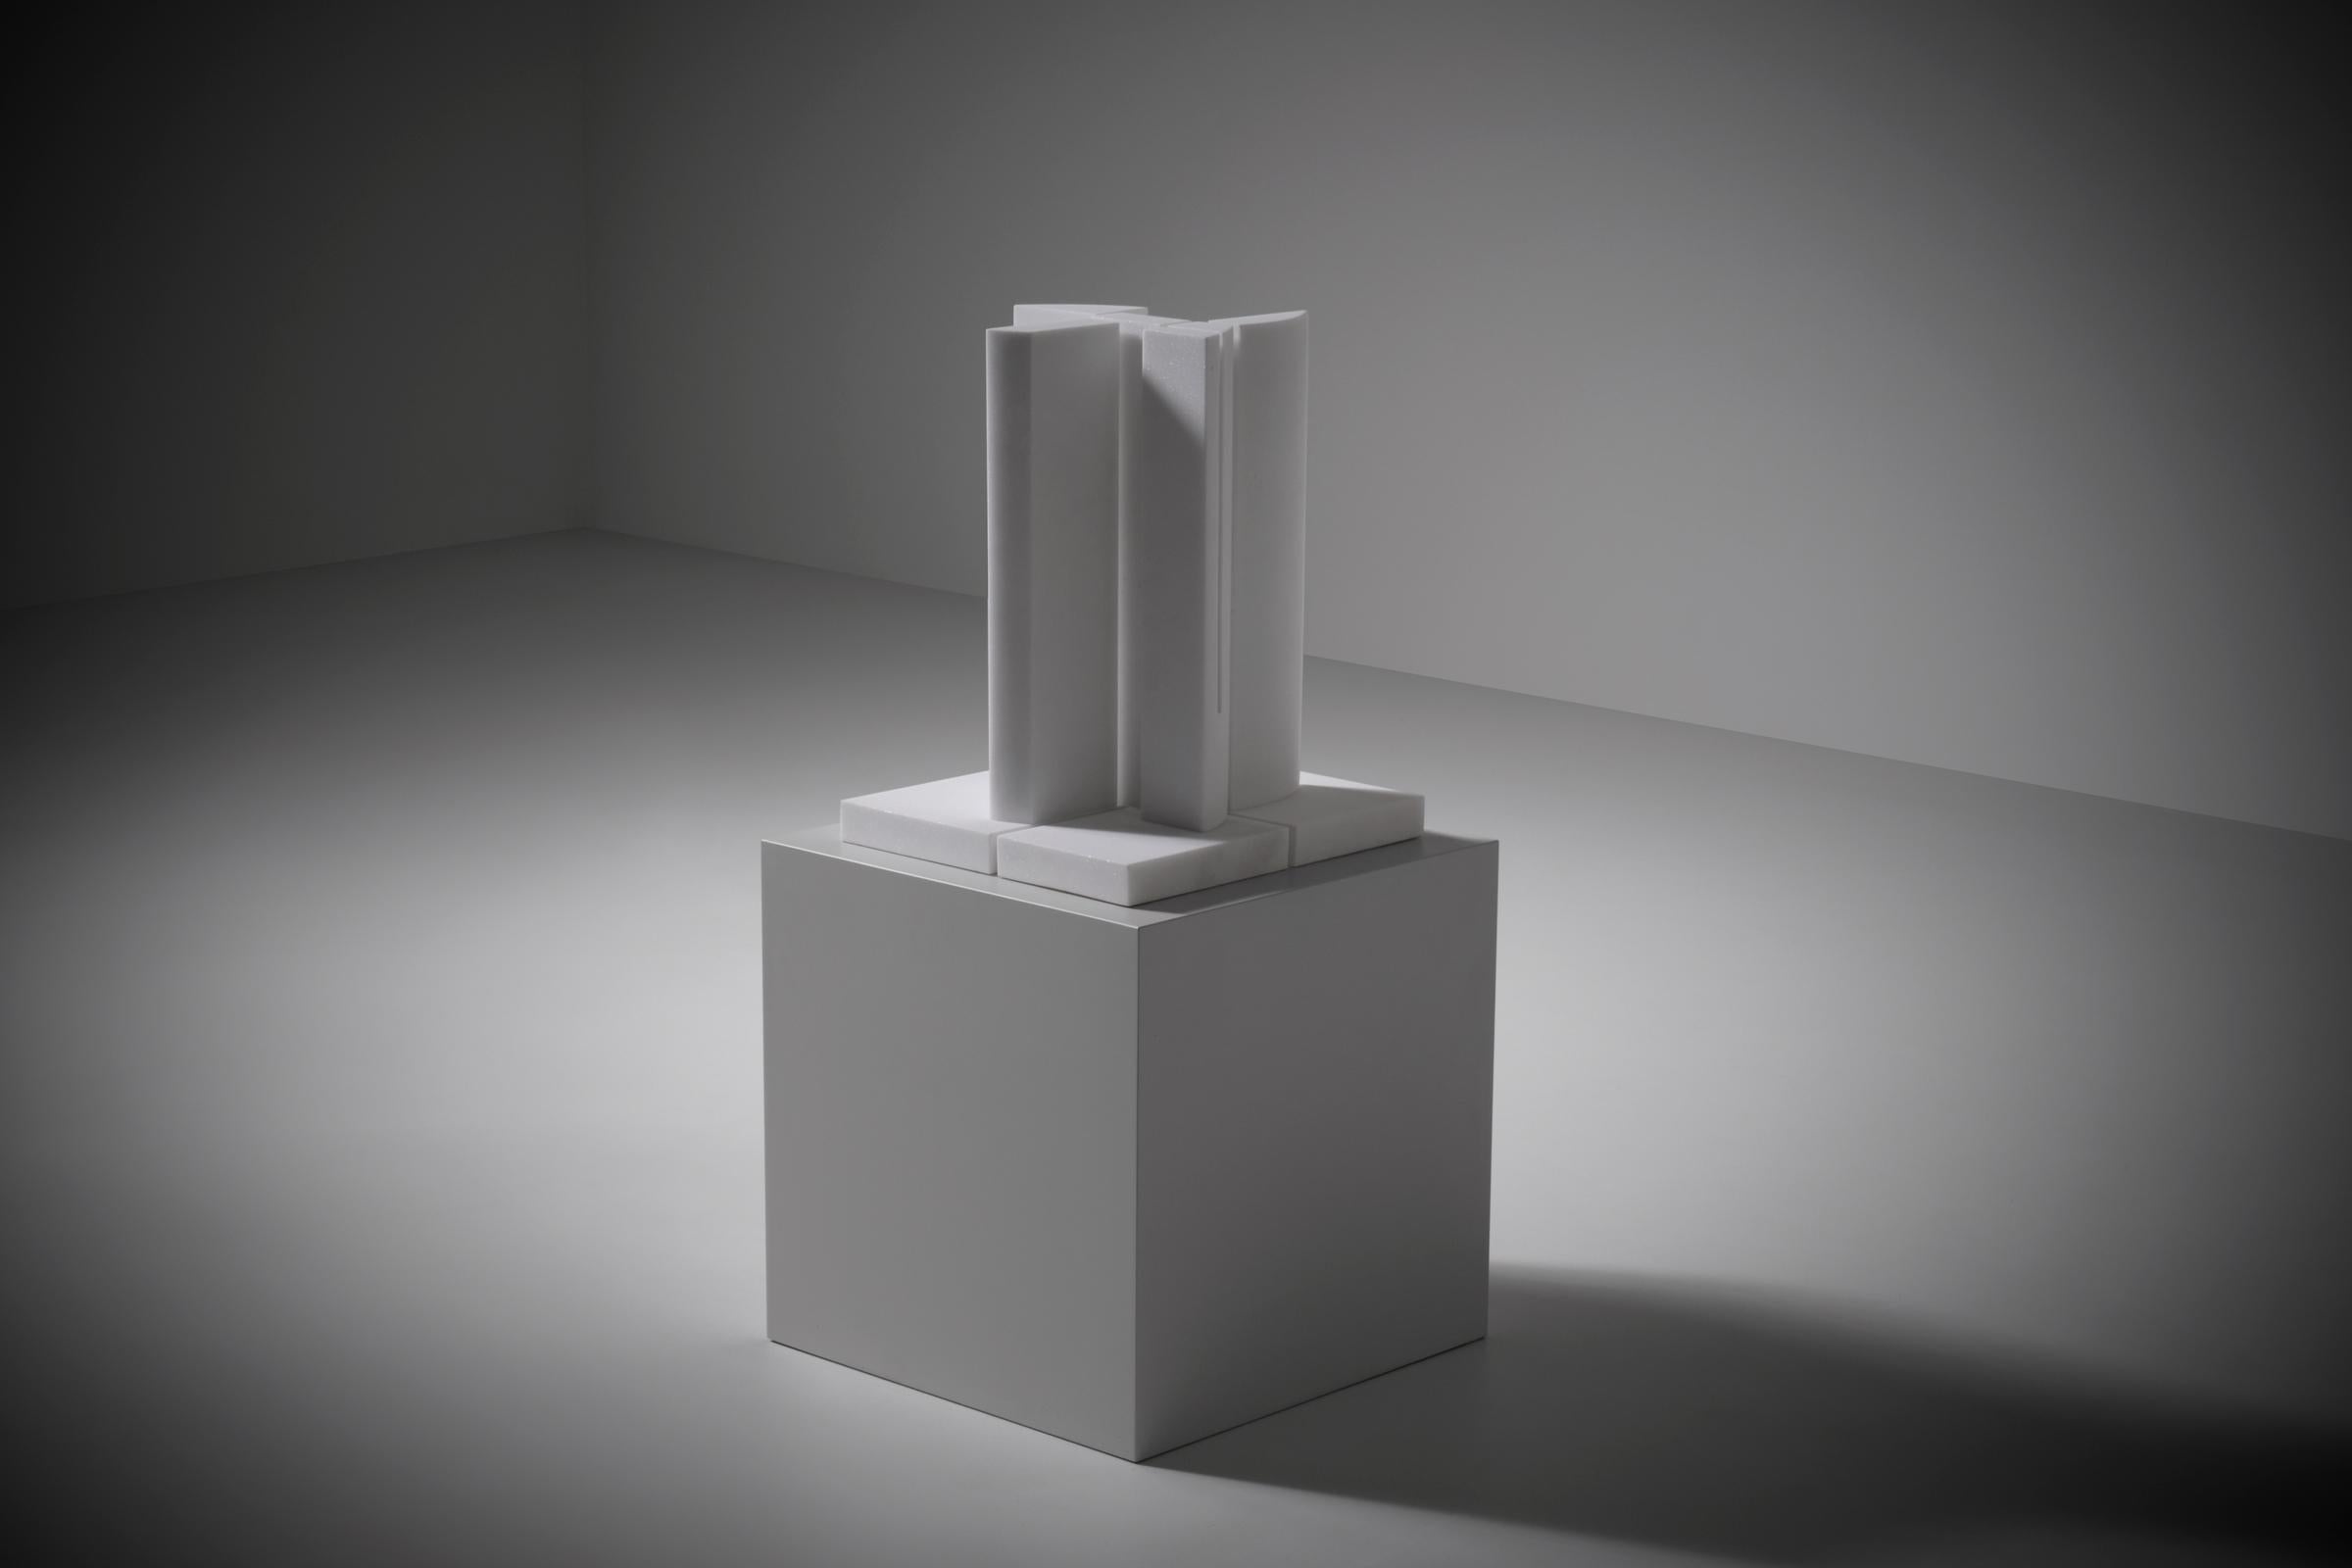 Post modern white Thasos marble sculpture by Jean-Claude Reussner (1928-2016), France 1988. The work of Jean-Claude Reussner is the story of a synthesis between the two facets of the same artist: the painter and the sculptor who took over his